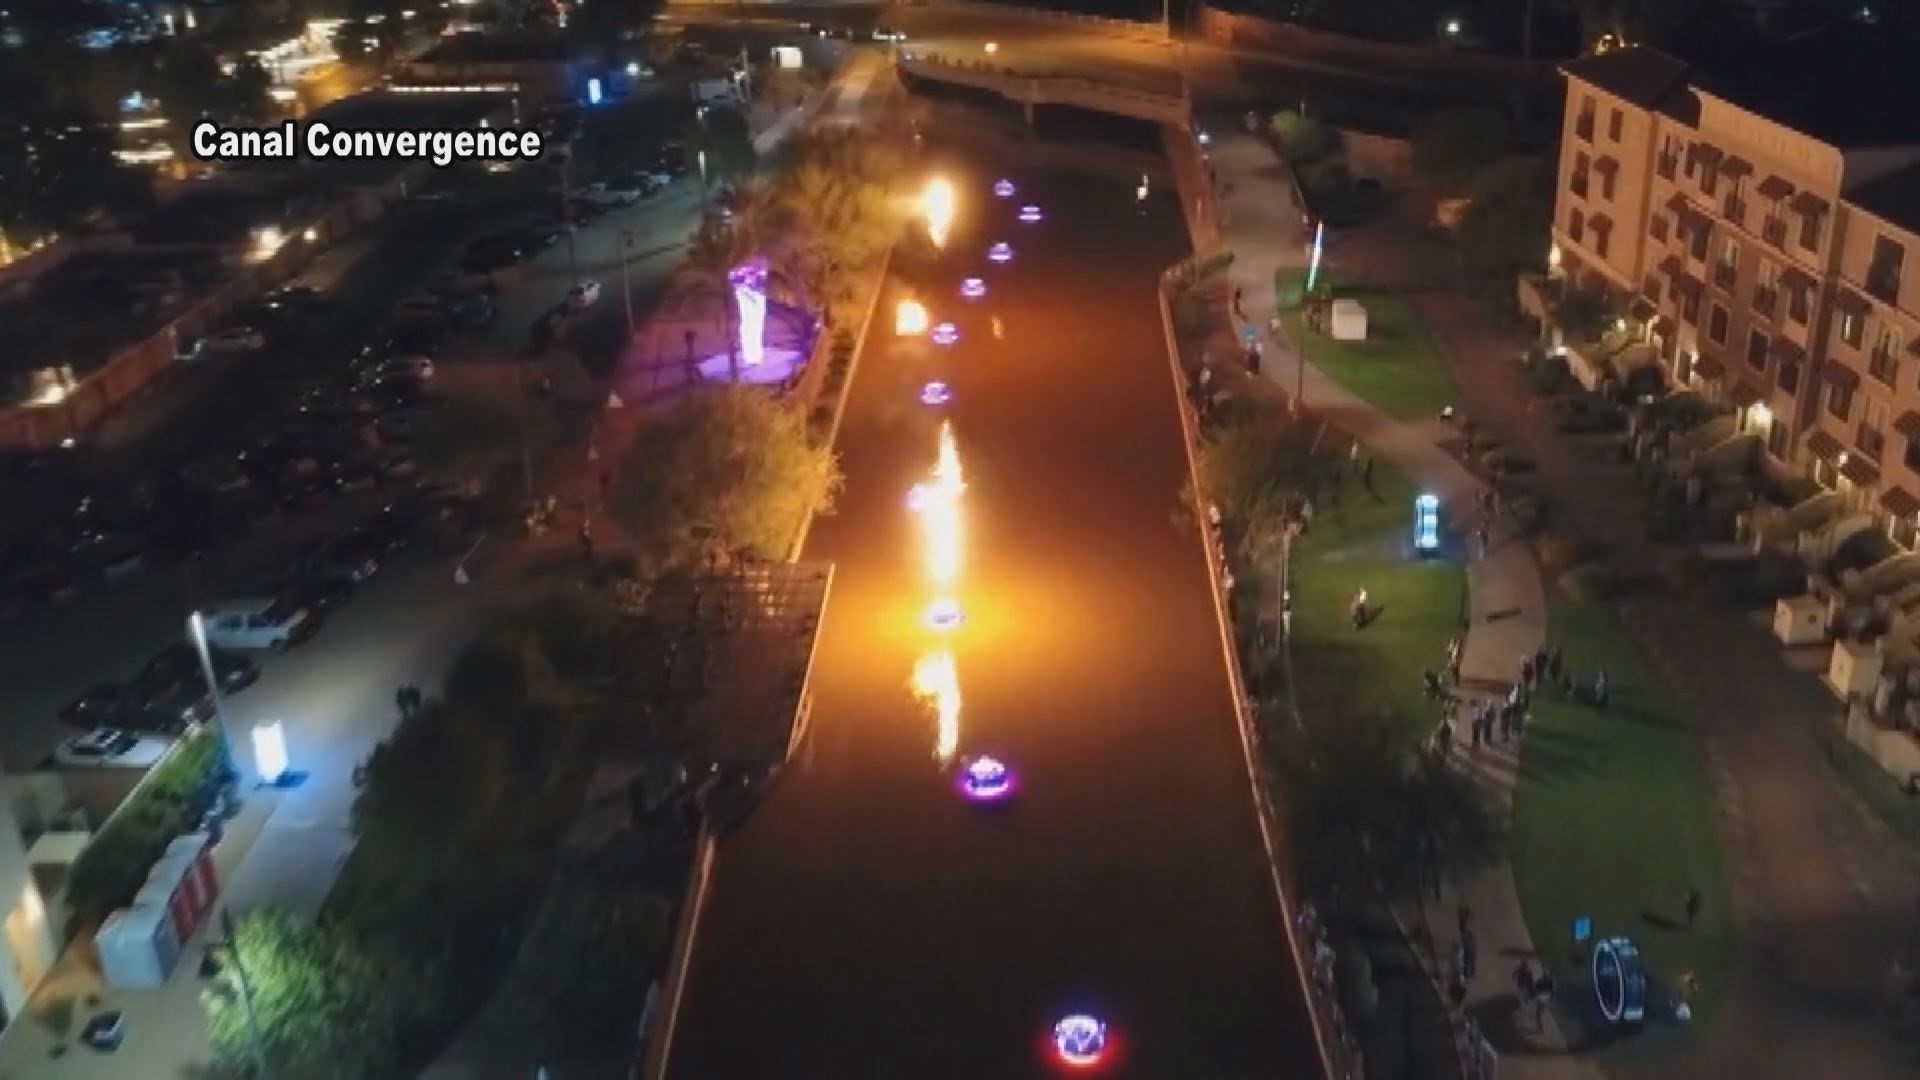 Canal Convergence happening along Scottsdale's historic waterfront with fire and ice show, gigantic butterflies and glow in the dark paint.